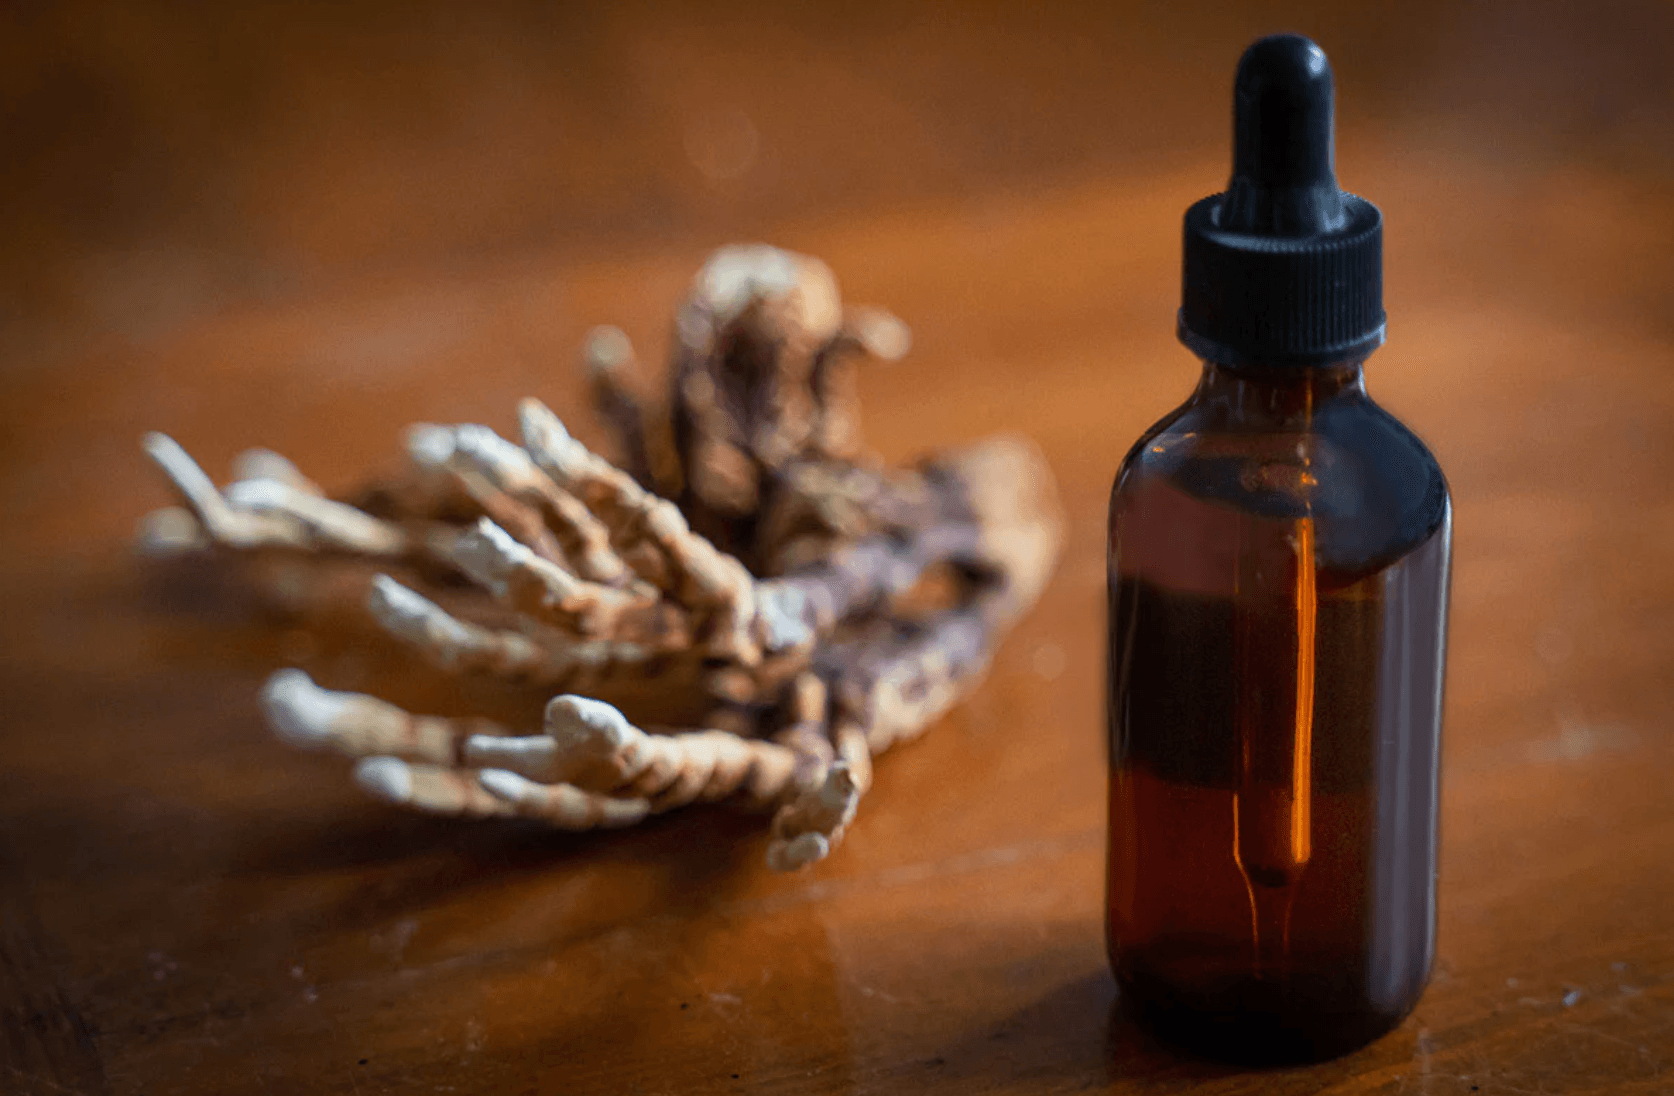 What Are The Benefits of Reishi Mushroom Tinctures? - No Ordinary Moments